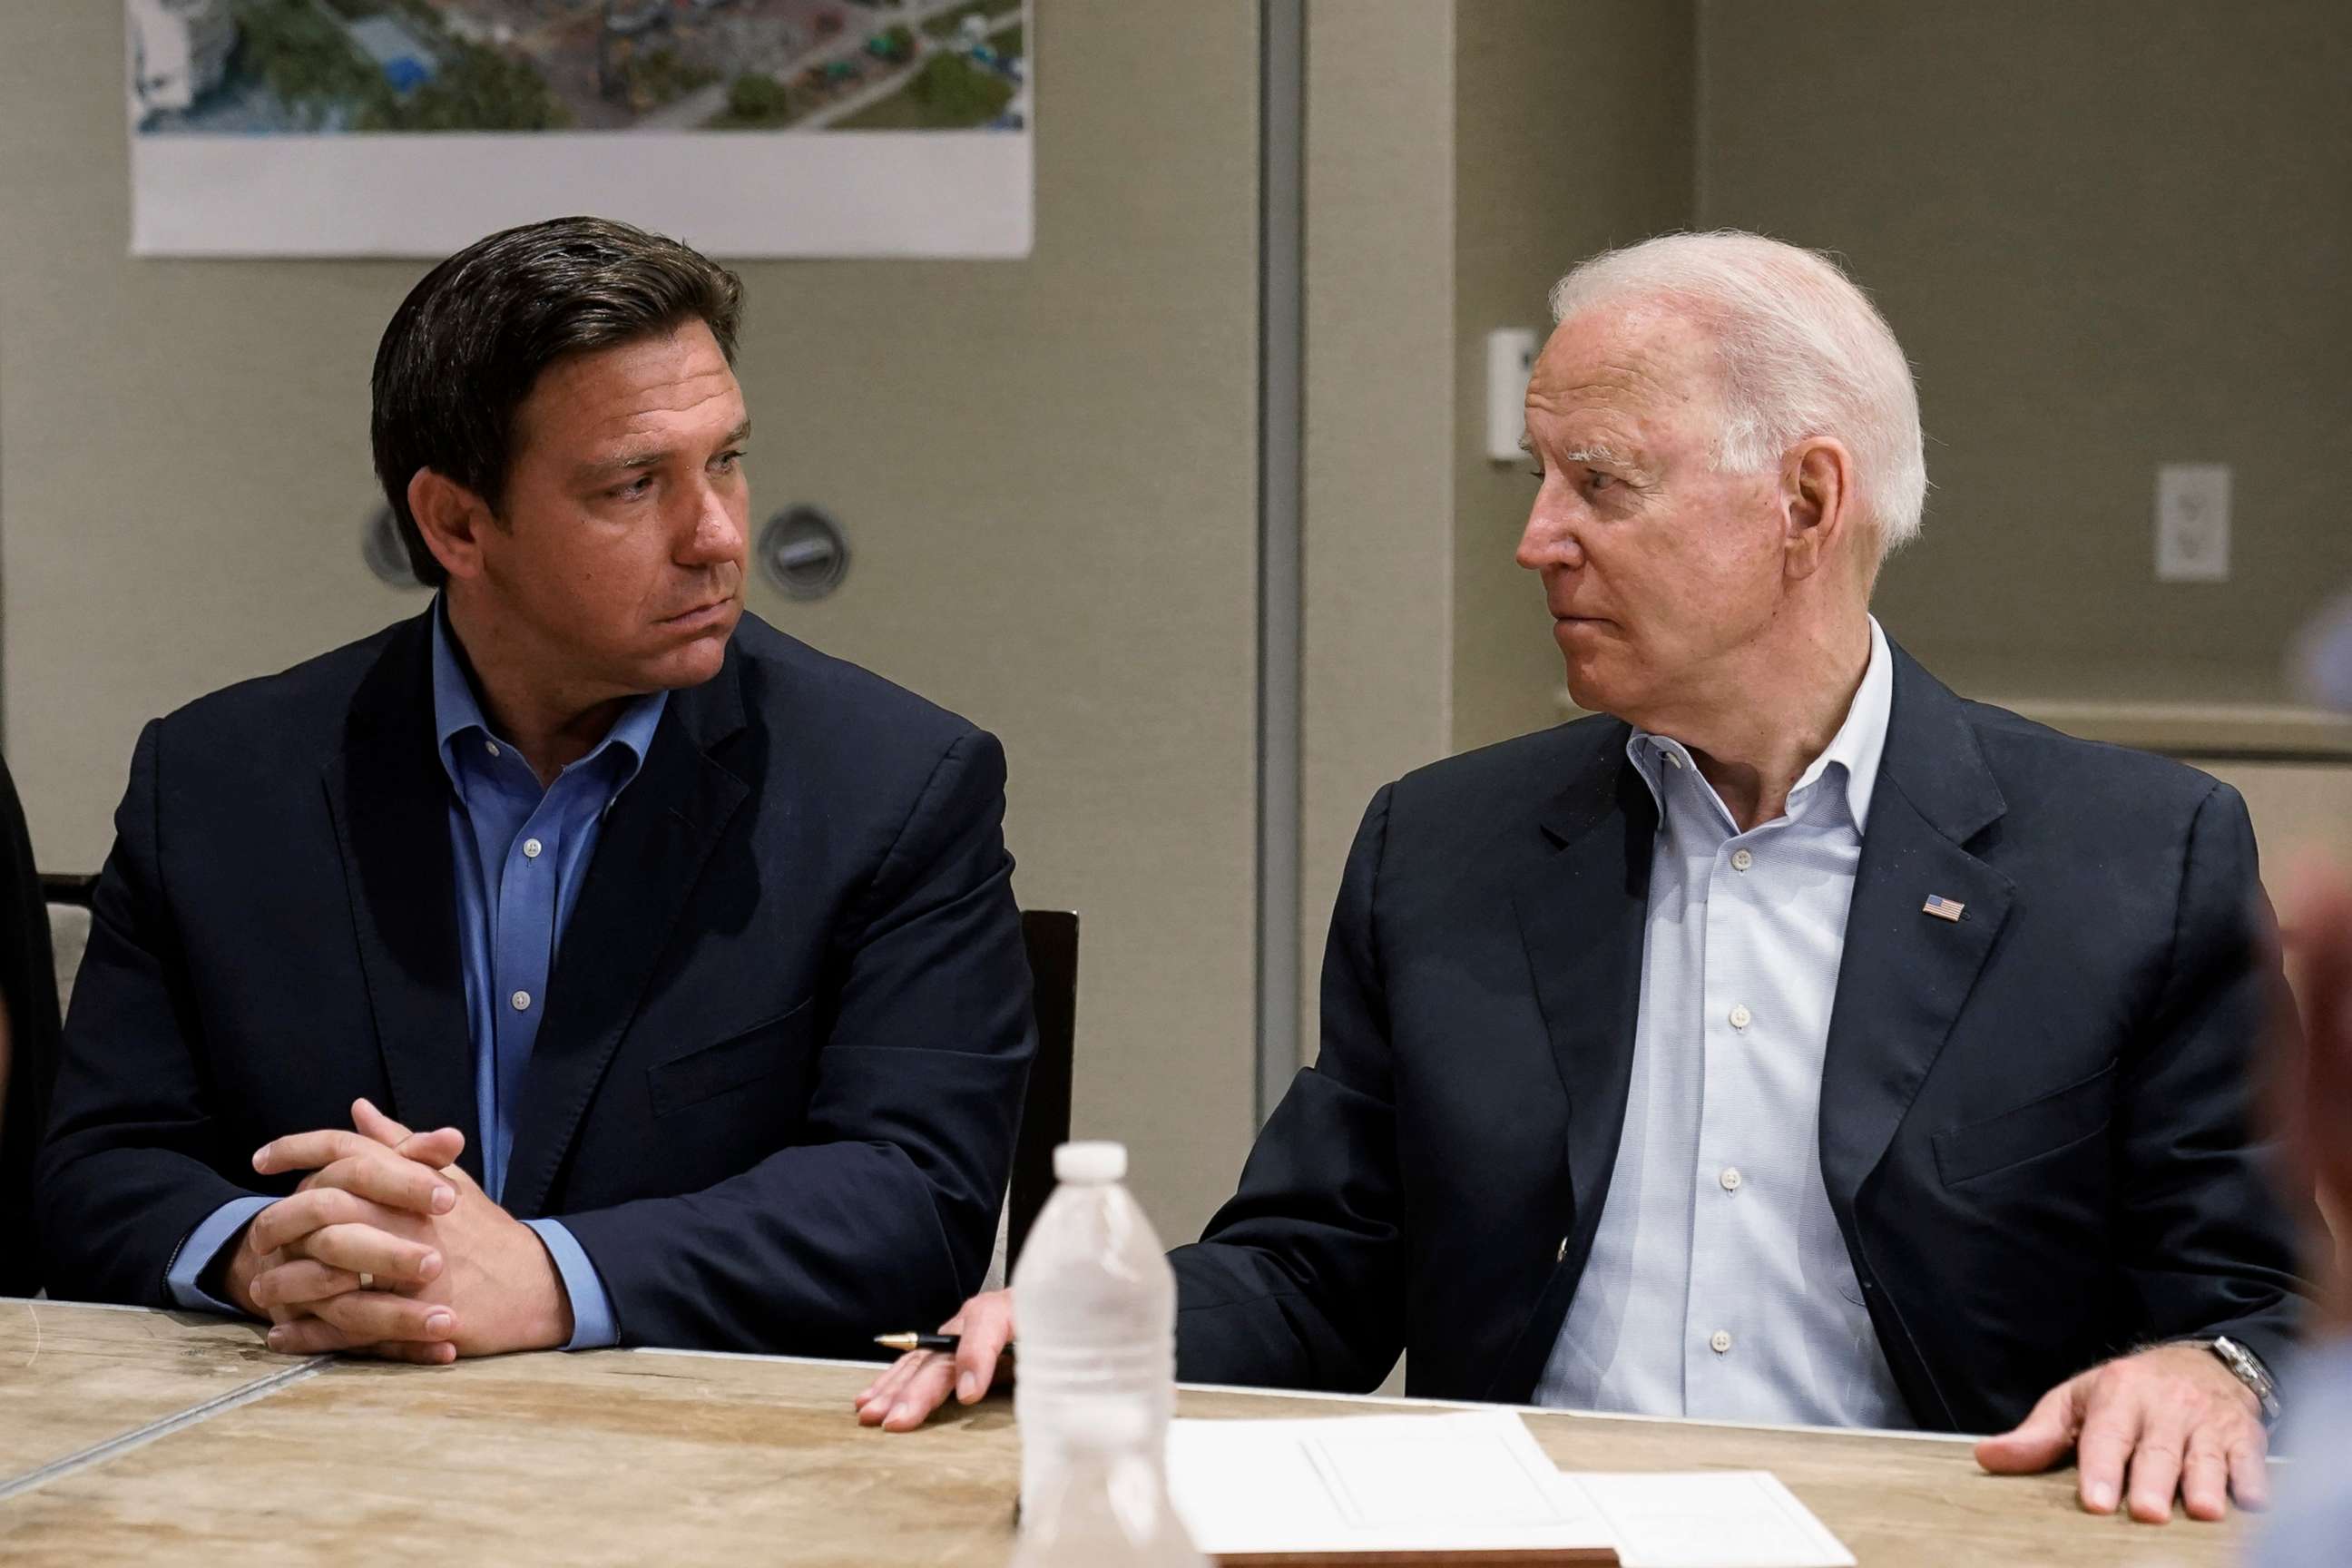 PHOTO: President Joe Biden looks at Florida Gov. Ron DeSantis during a briefing with first responders and local officials in Miami, July 1, 2021, on the condo tower that collapsed in Surfside, Fla., last week.